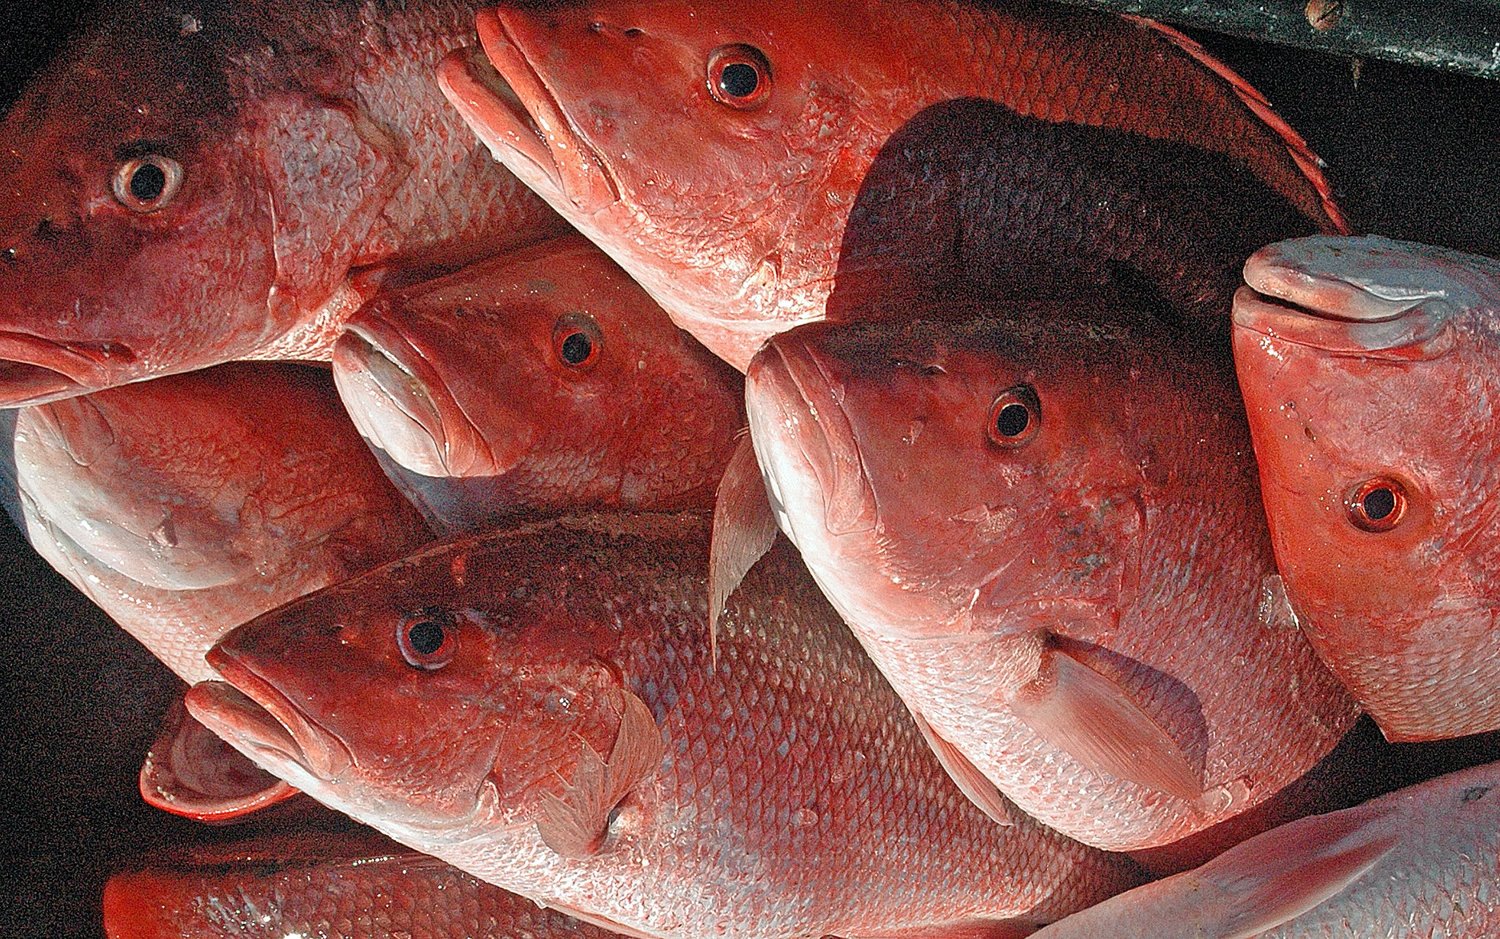 Red snapper season opens on May 26.